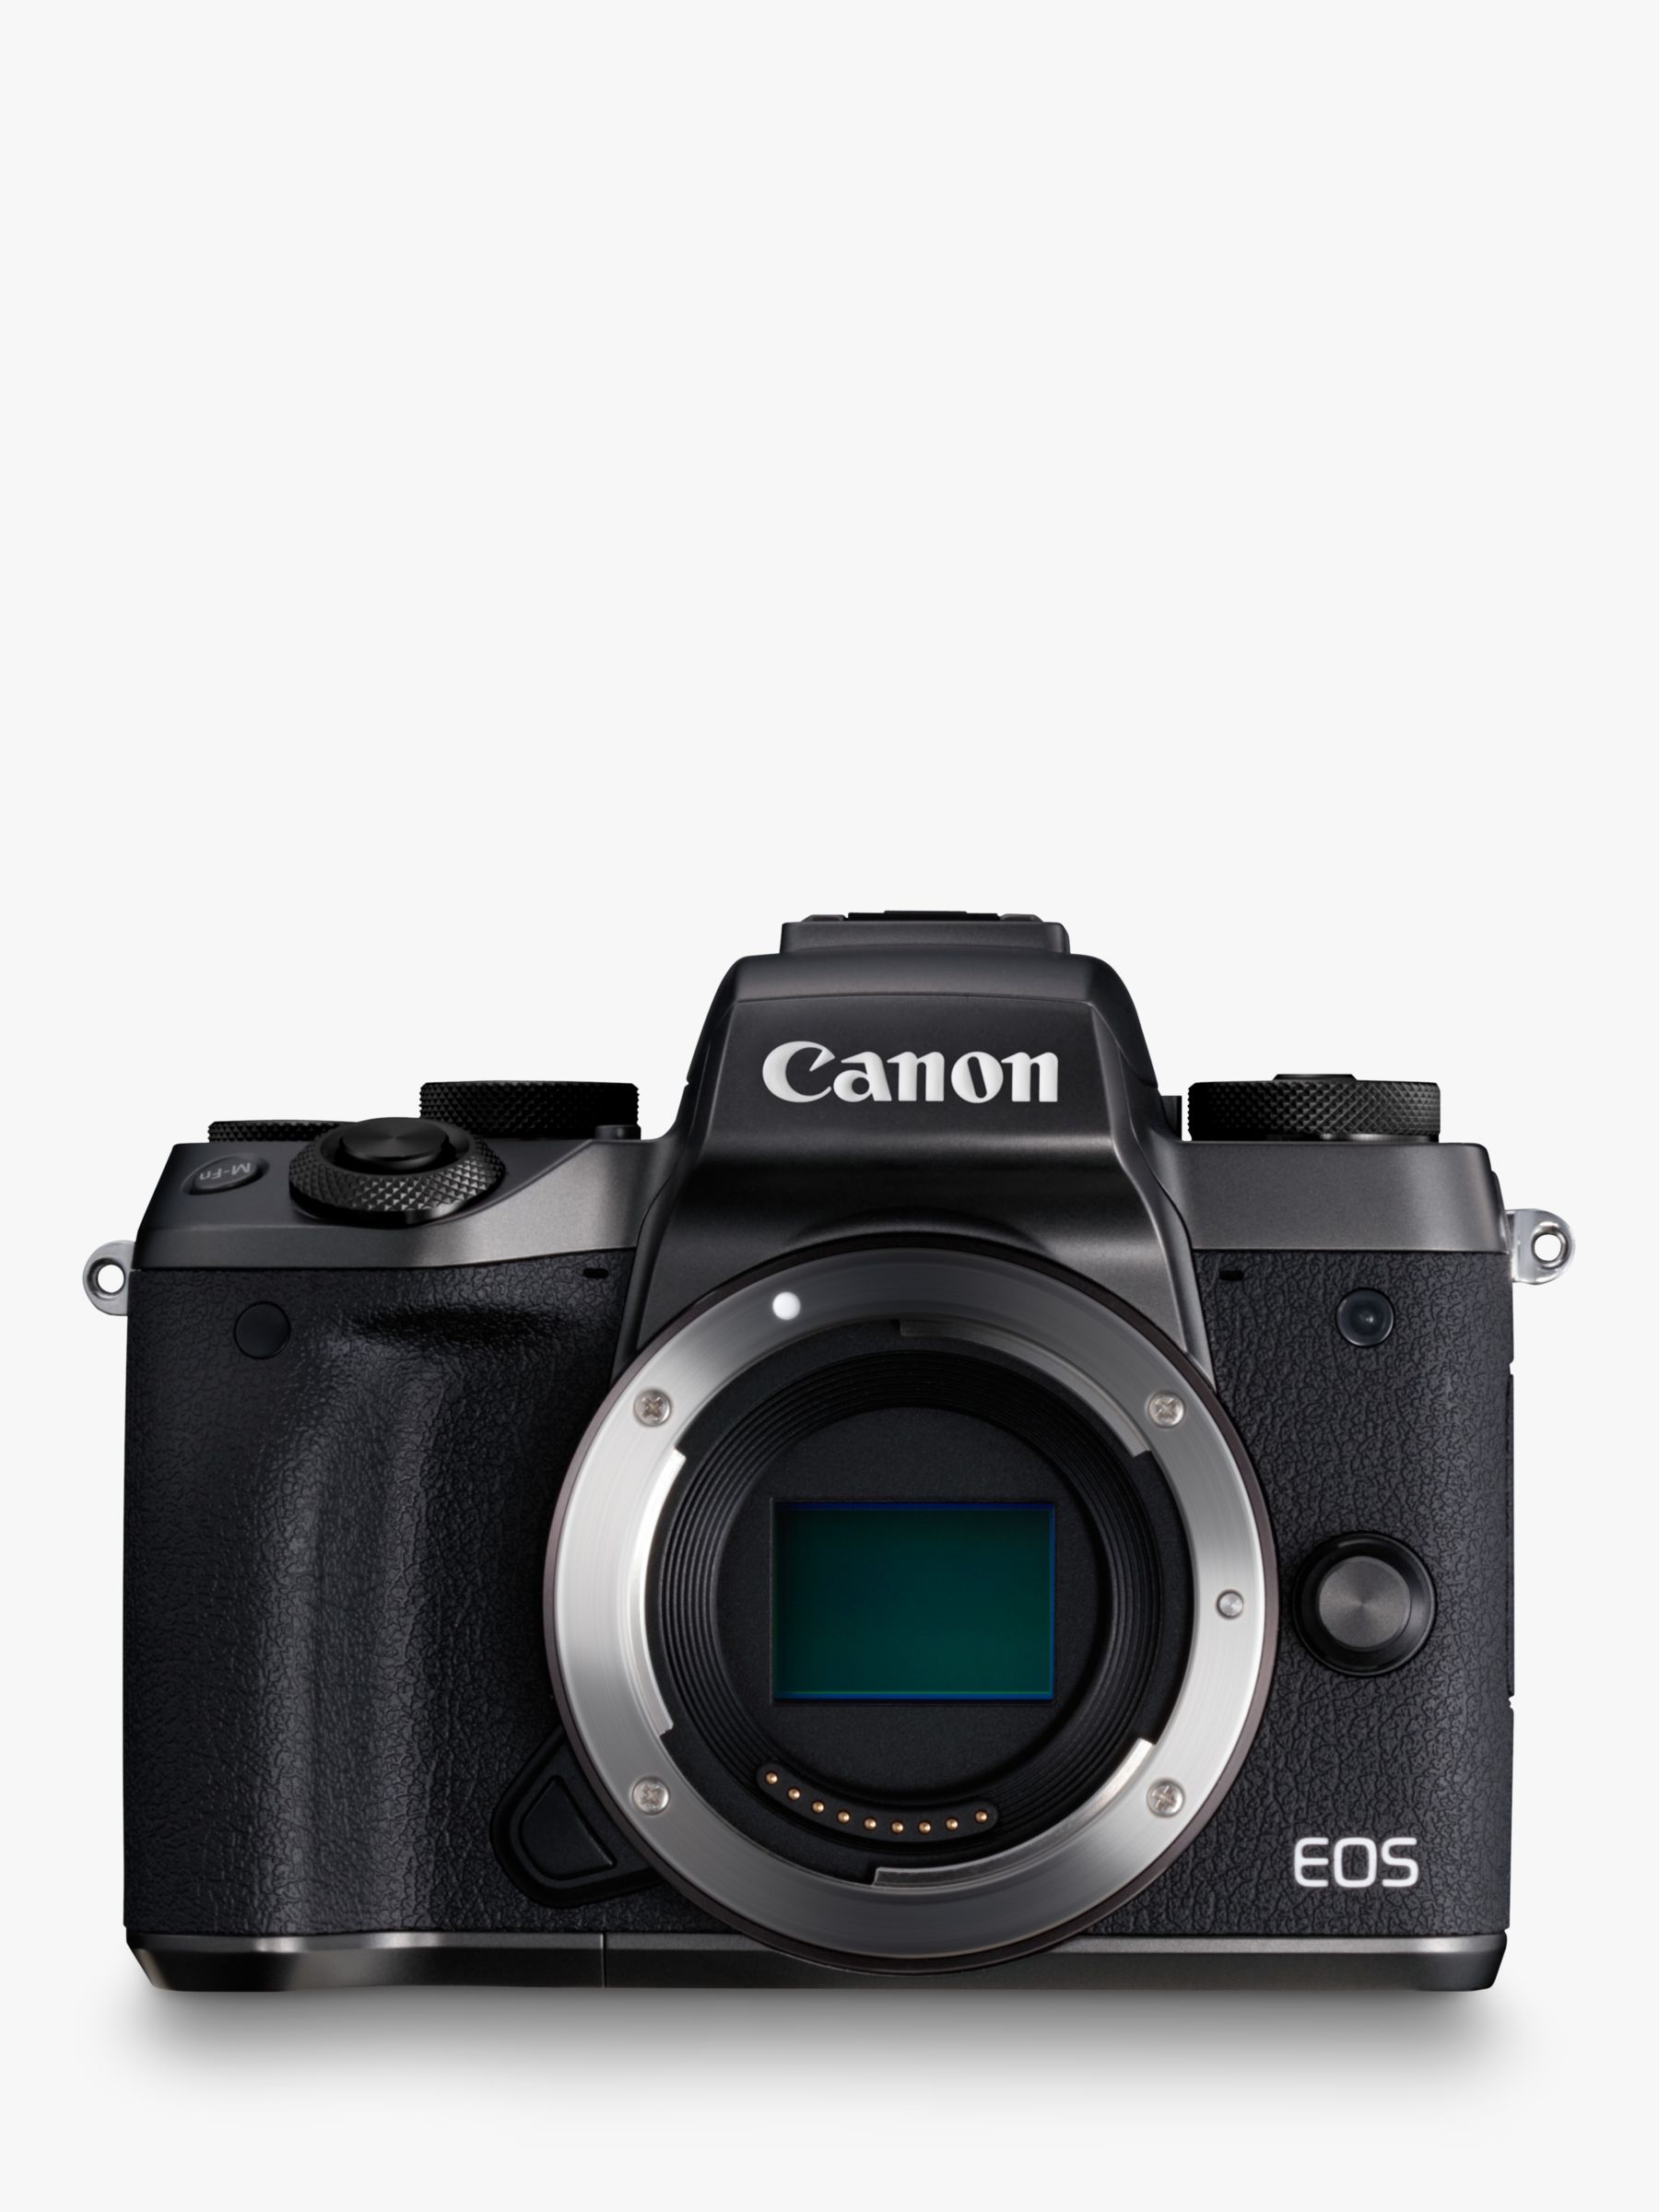 Canon EOS M5 Compact System Camera, HD 1080p, 24.2MP, Wi-Fi, Bluetooth, NFC, 3.2 LCD Tiltable Touch Screen, Body Only